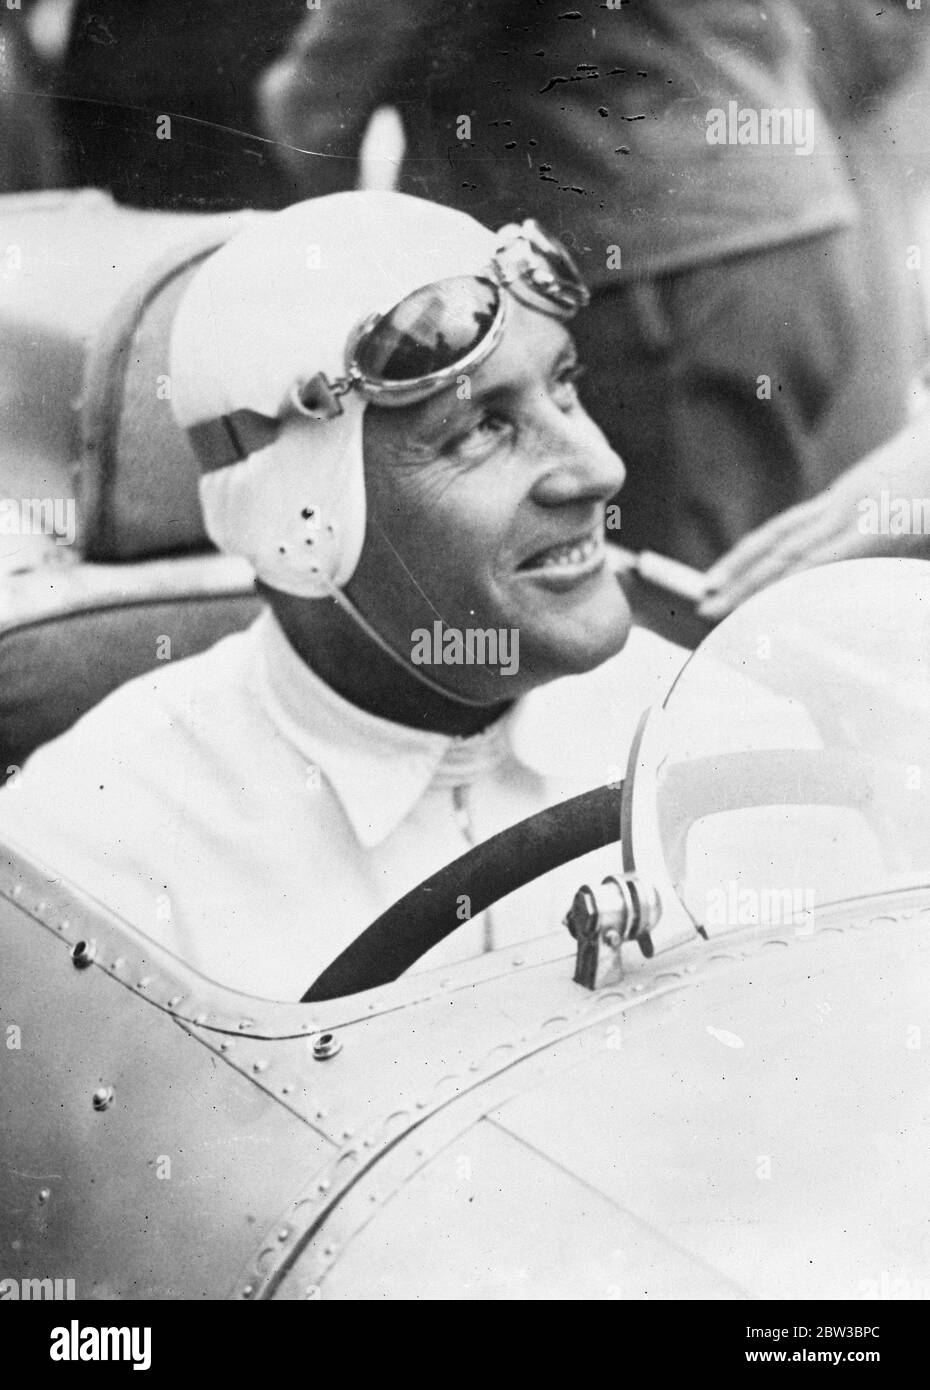 Hans Stuck , the German motor racing driver , in his car after making 5 new world records ( motor racing ) . 22 October 1934 Stock Photo